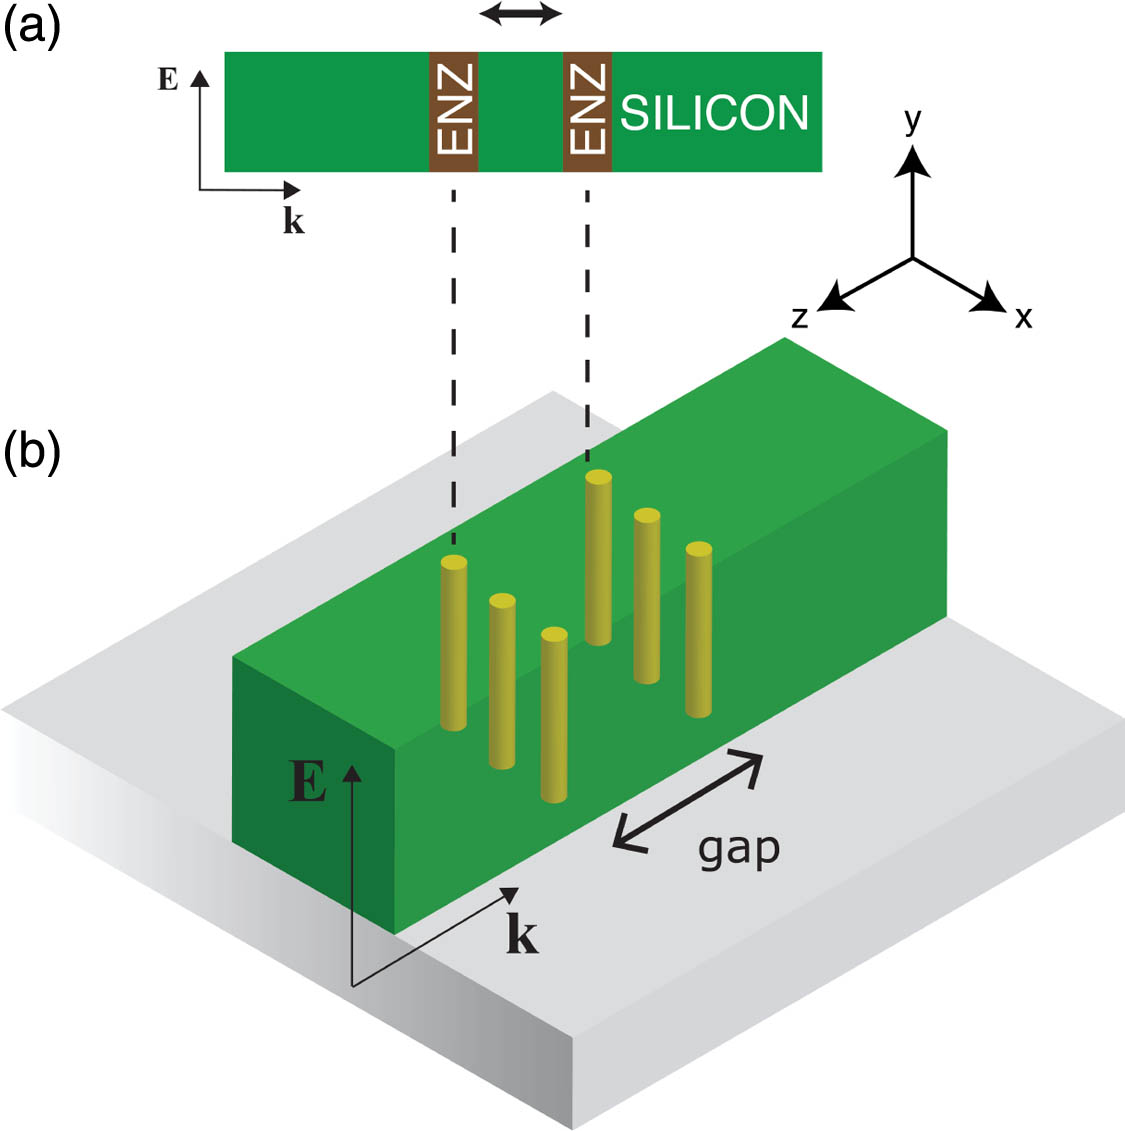 (a) Schematic of the modulator composed of two layers of ENZ metamaterial integrated in a conventional Si waveguide and separated by a gap. (b) Design based on plasmonic nanorods. The frequency to achieve the ENZ condition can be tuned by varying the diameter of and separation between nanorods.